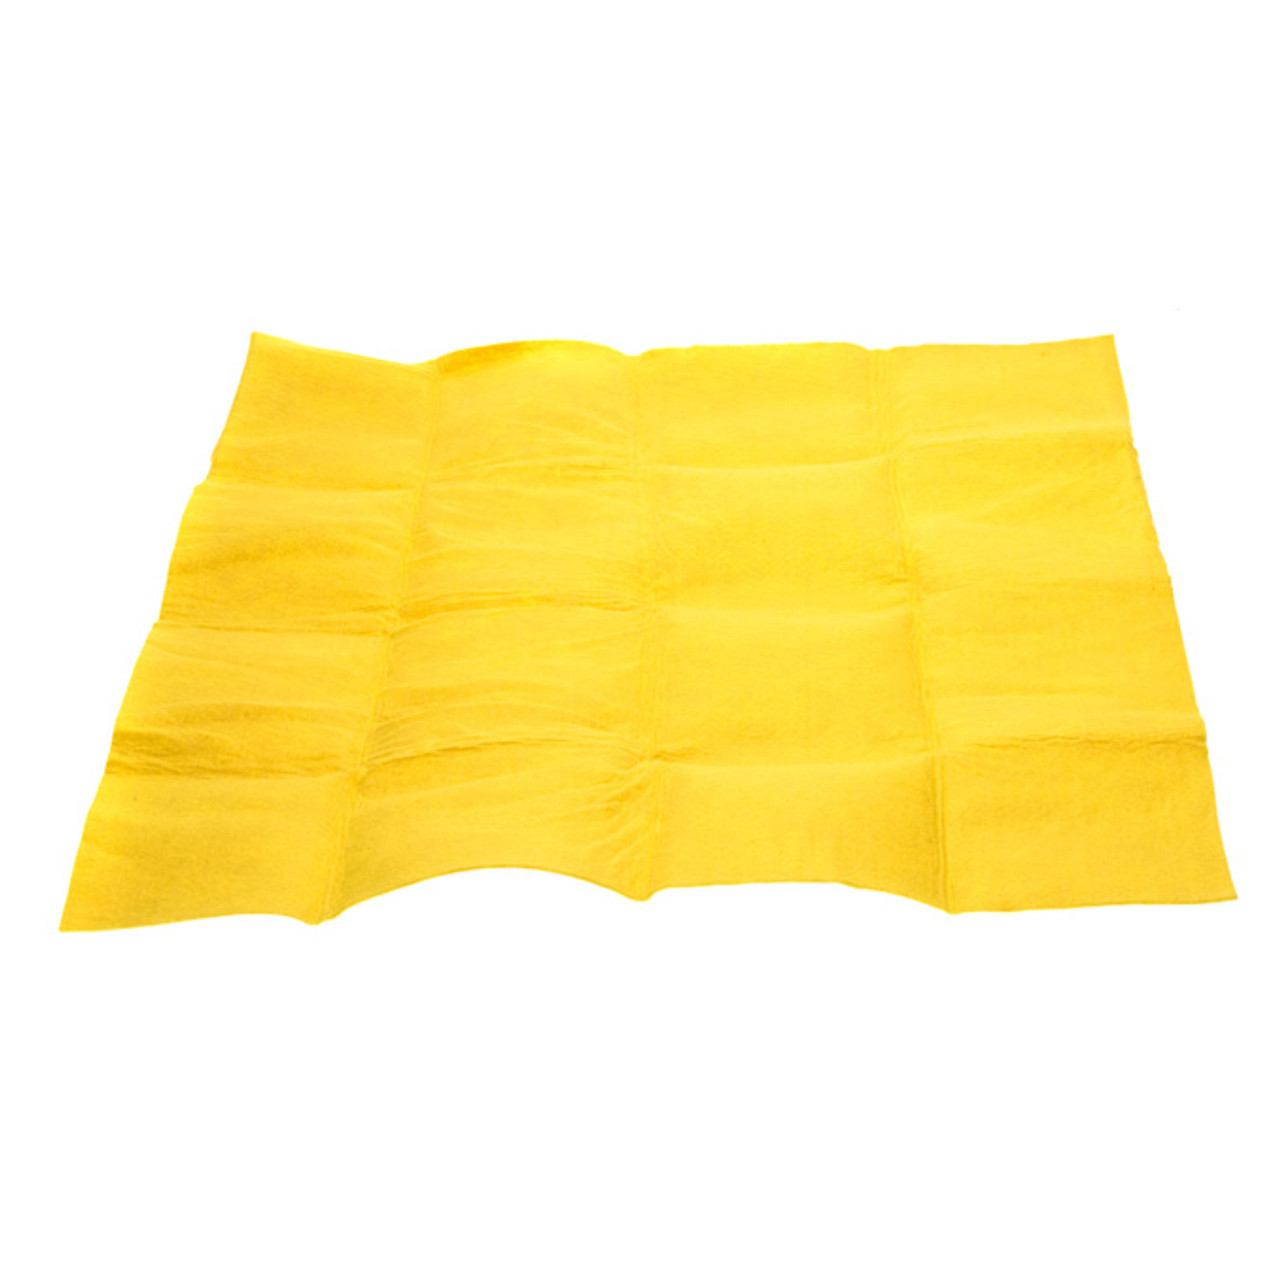 https://cdn11.bigcommerce.com/s-tumf4kk1l4/images/stencil/1280x1280/products/3131/5758/20-x-24-camp-towel-yellow-non-woven-super-absorbent-material-7__39977.1640714988.jpg?c=1?imbypass=on